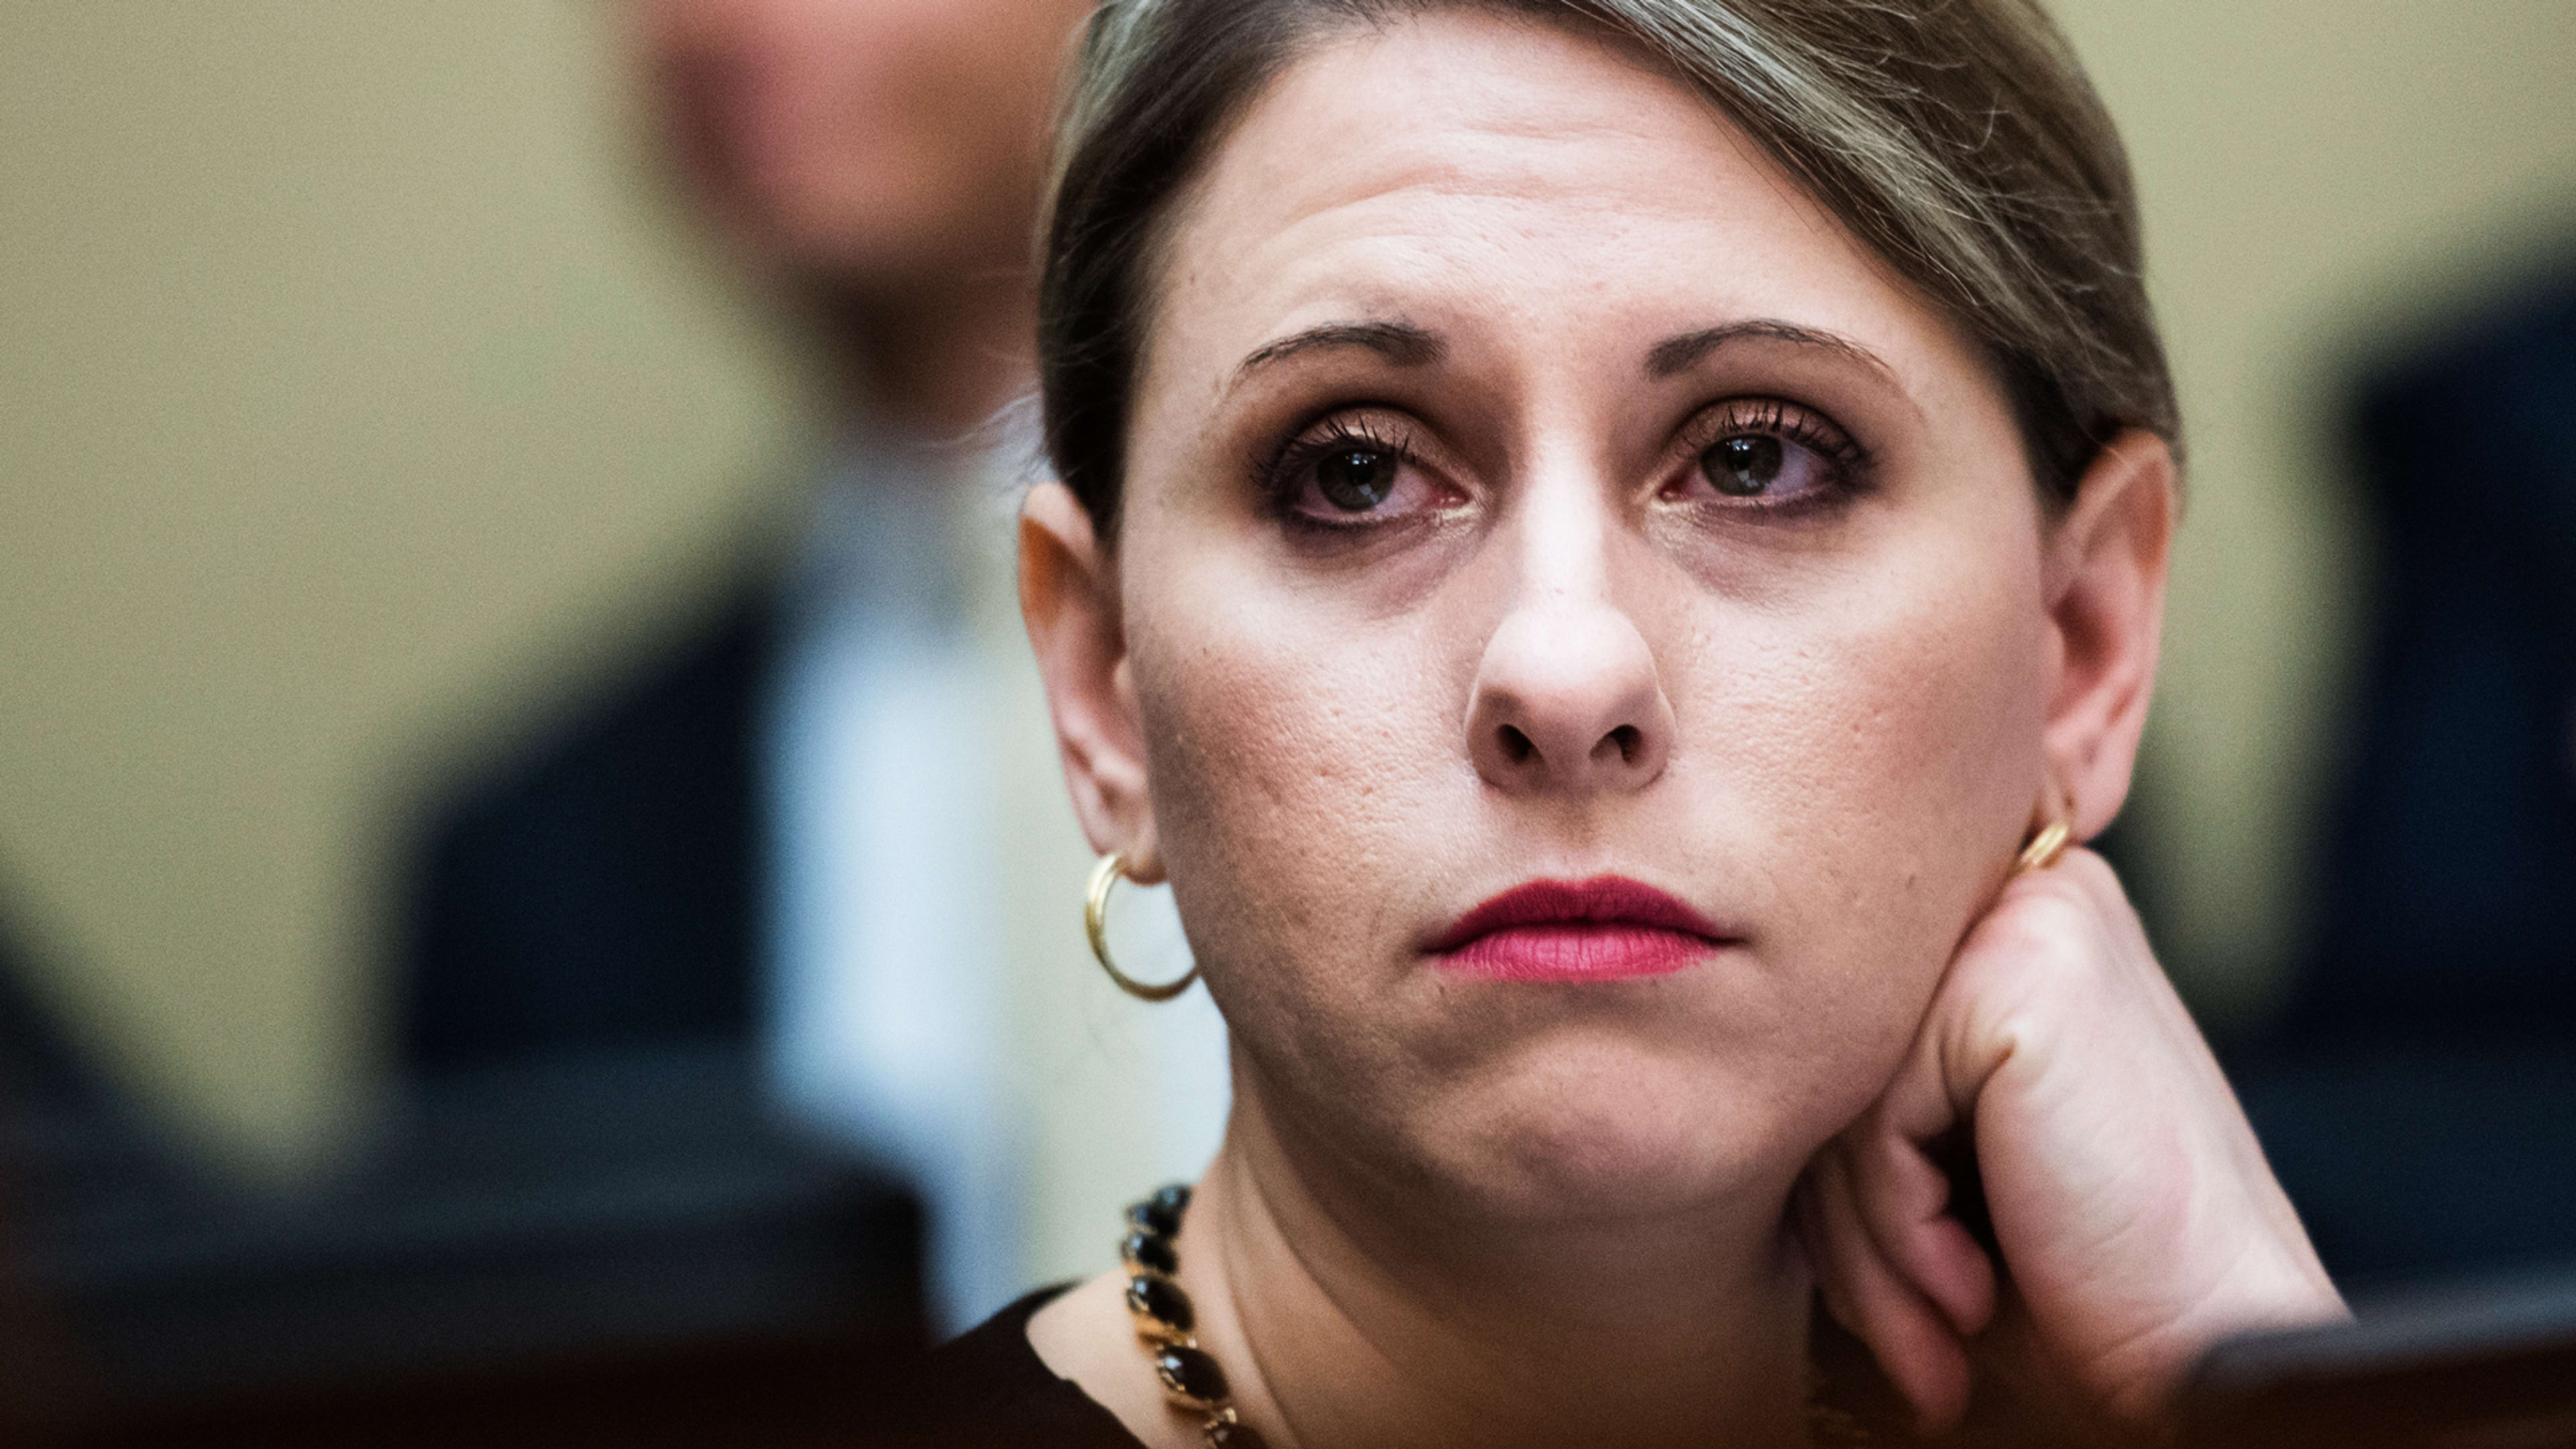 Read: Katie Hill vows to keep fighting ‘cyber exploitation’ of women in letter resigning from Congress